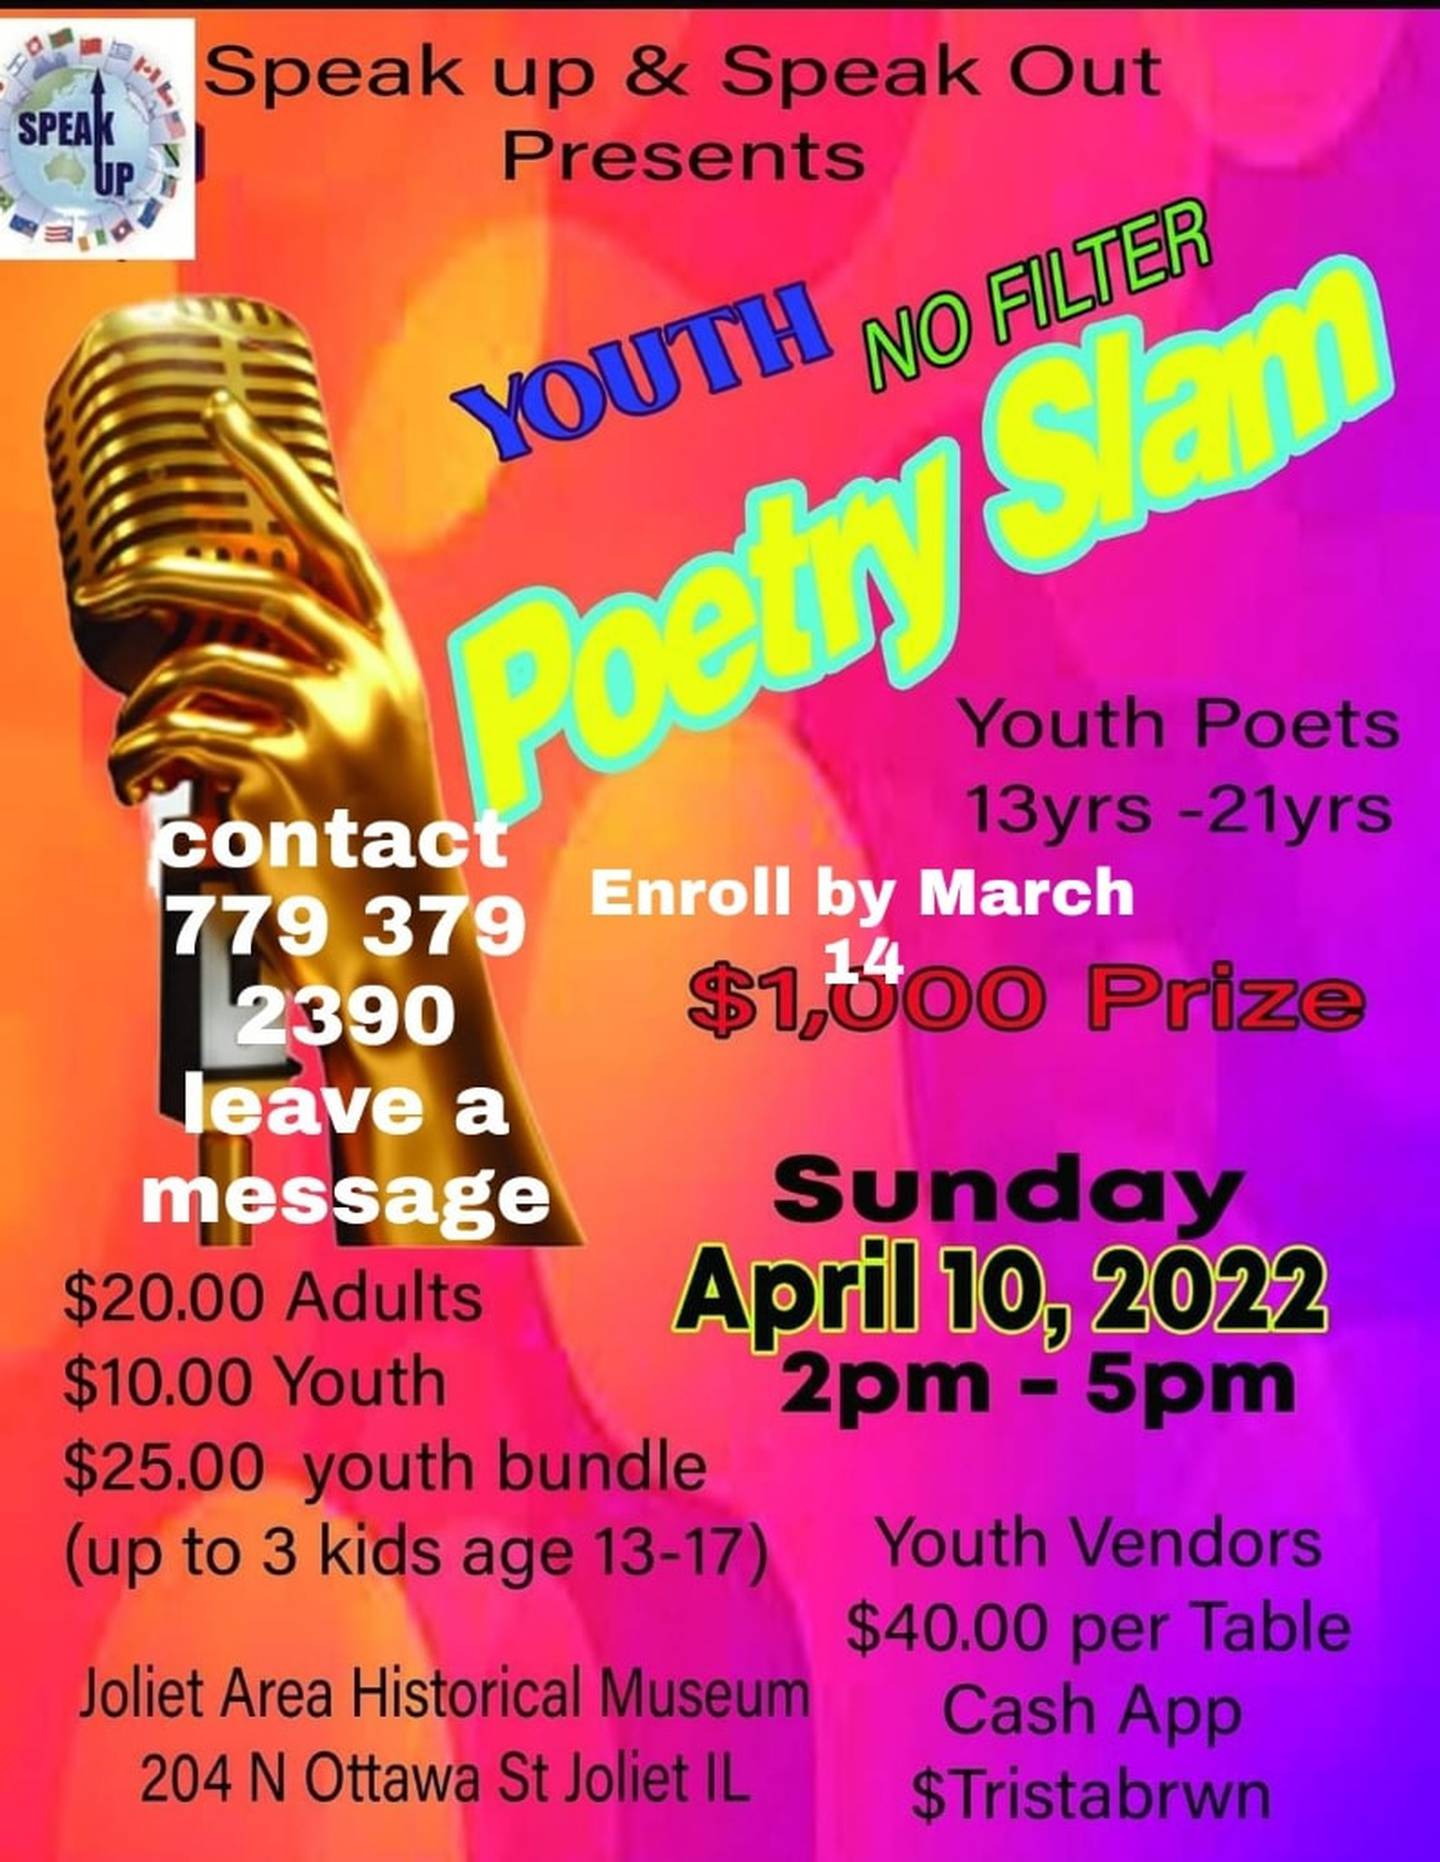 Youth ages 13 to 21 are encouraged to register for the poetry slam contest presented by Speak Up & Speak Out. The event will be held Sunday, April 10, 2022, at the Joliet Area Historical Museum, located at 204 N. Ottawa St. in Joliet.